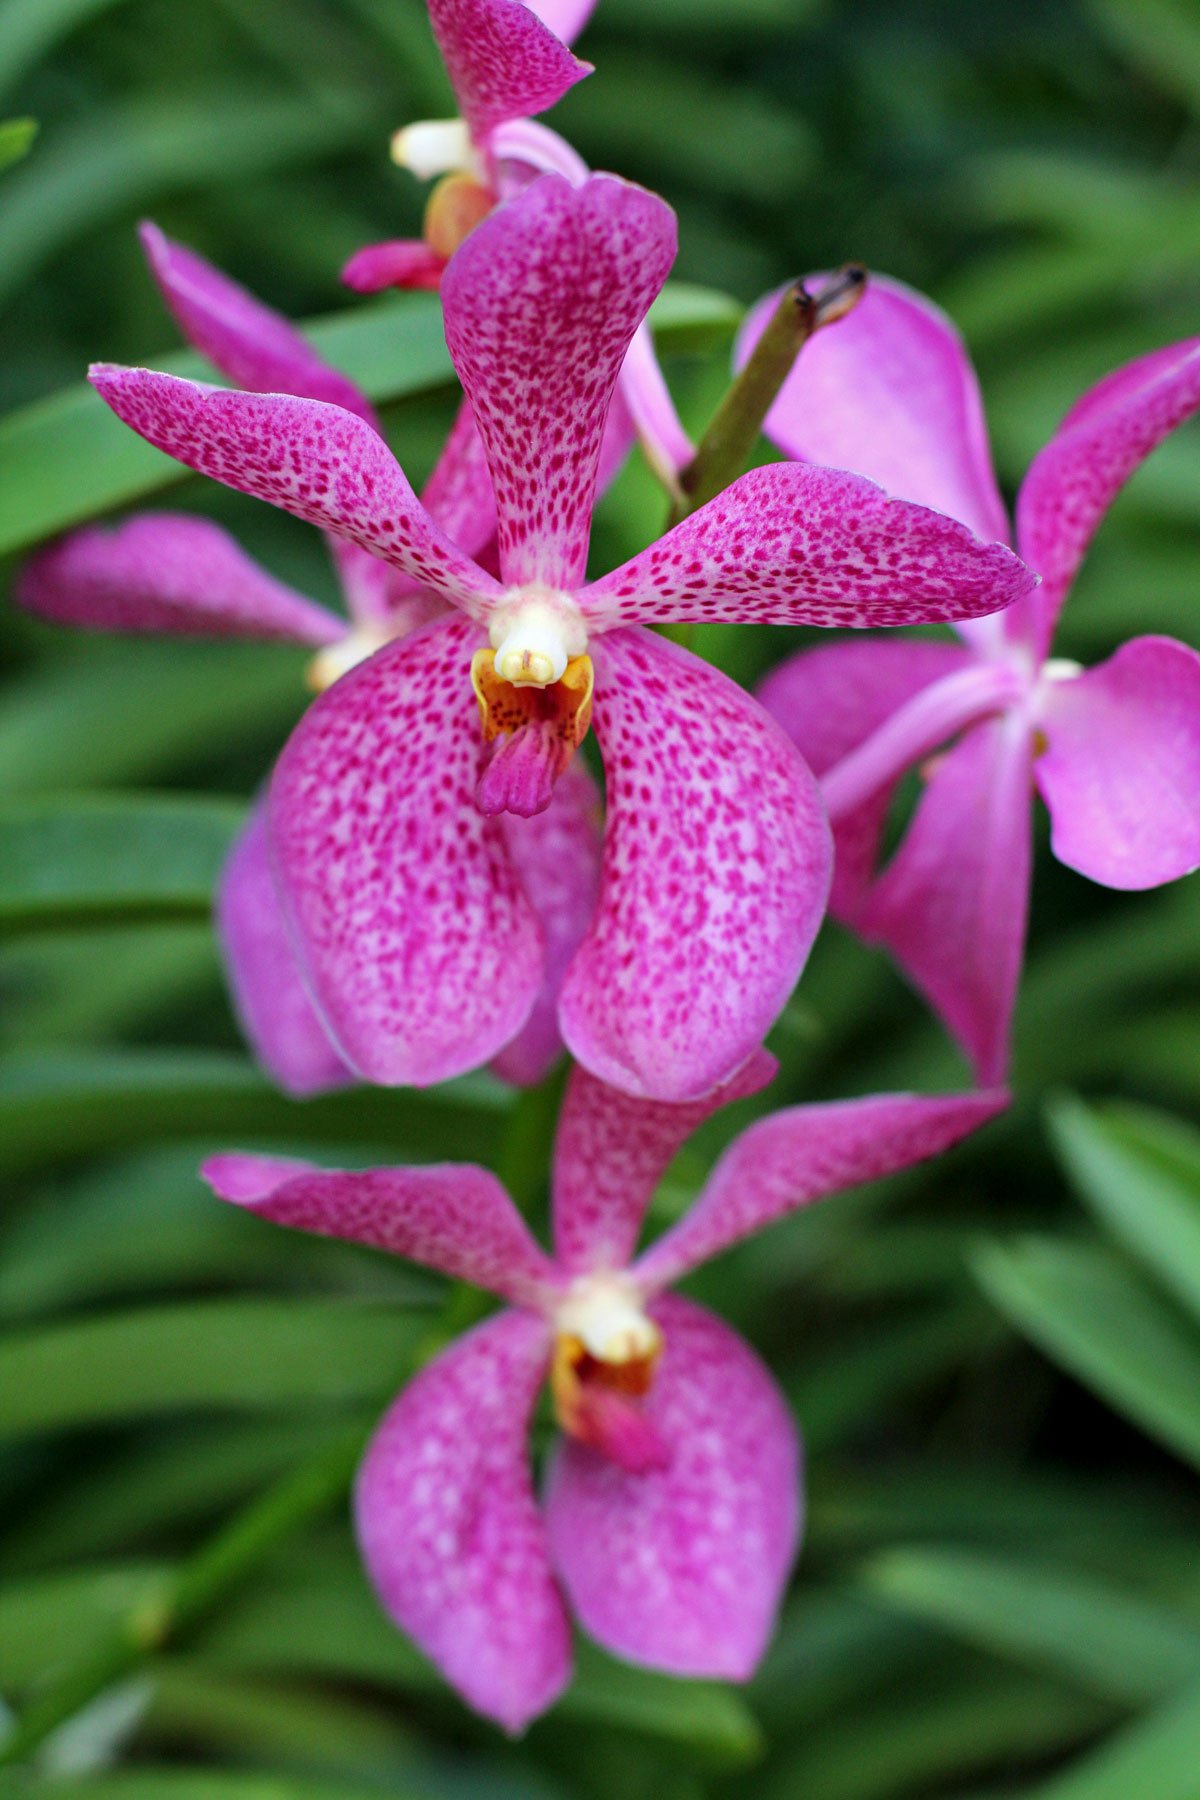 See the World's Biggest Display of Orchids at the National Orchid Garden in Singapore